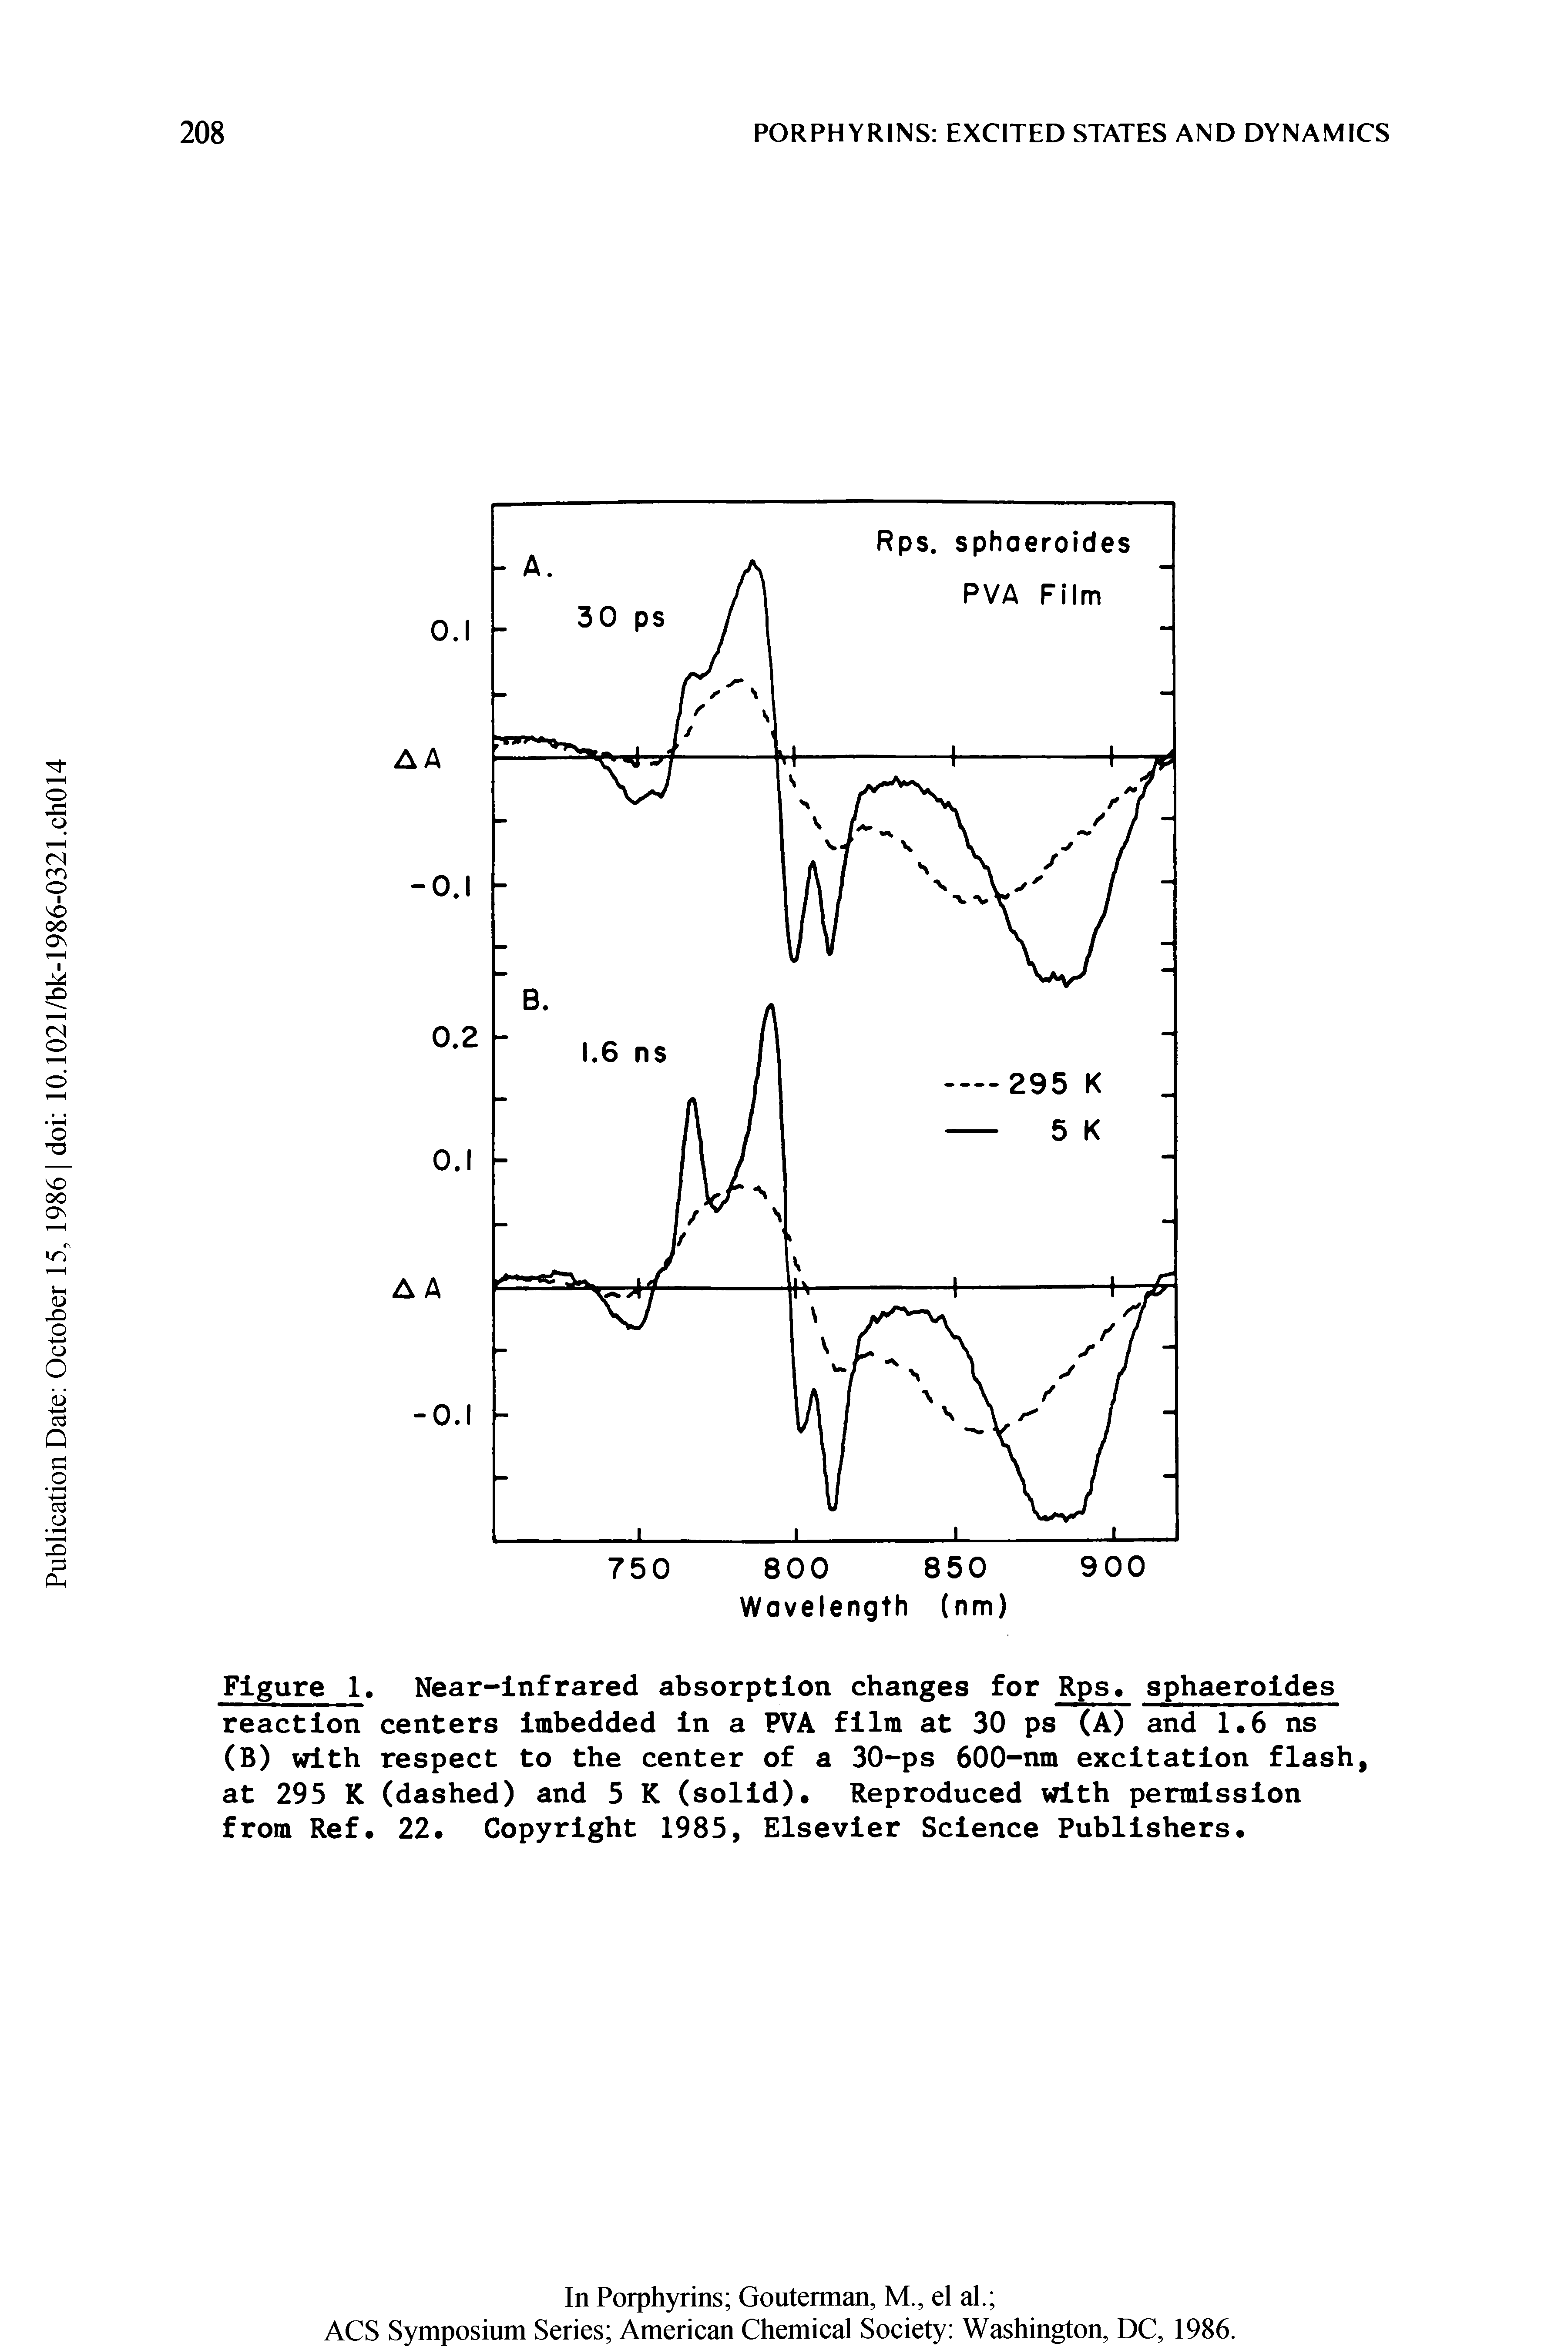 Figure 1. Near-infrared absorption changes for Rps, sphaeroides reaction centers imbedded in a PVA film at 30 ps (A) and 1,6 ns (B) with respect to the center of a 30-ps 600-nm excitation flash, at 295 K (dashed) and 5 K (solid). Reproduced with permission from Ref. 22. Copyright 1985, Elsevier Science Publishers.